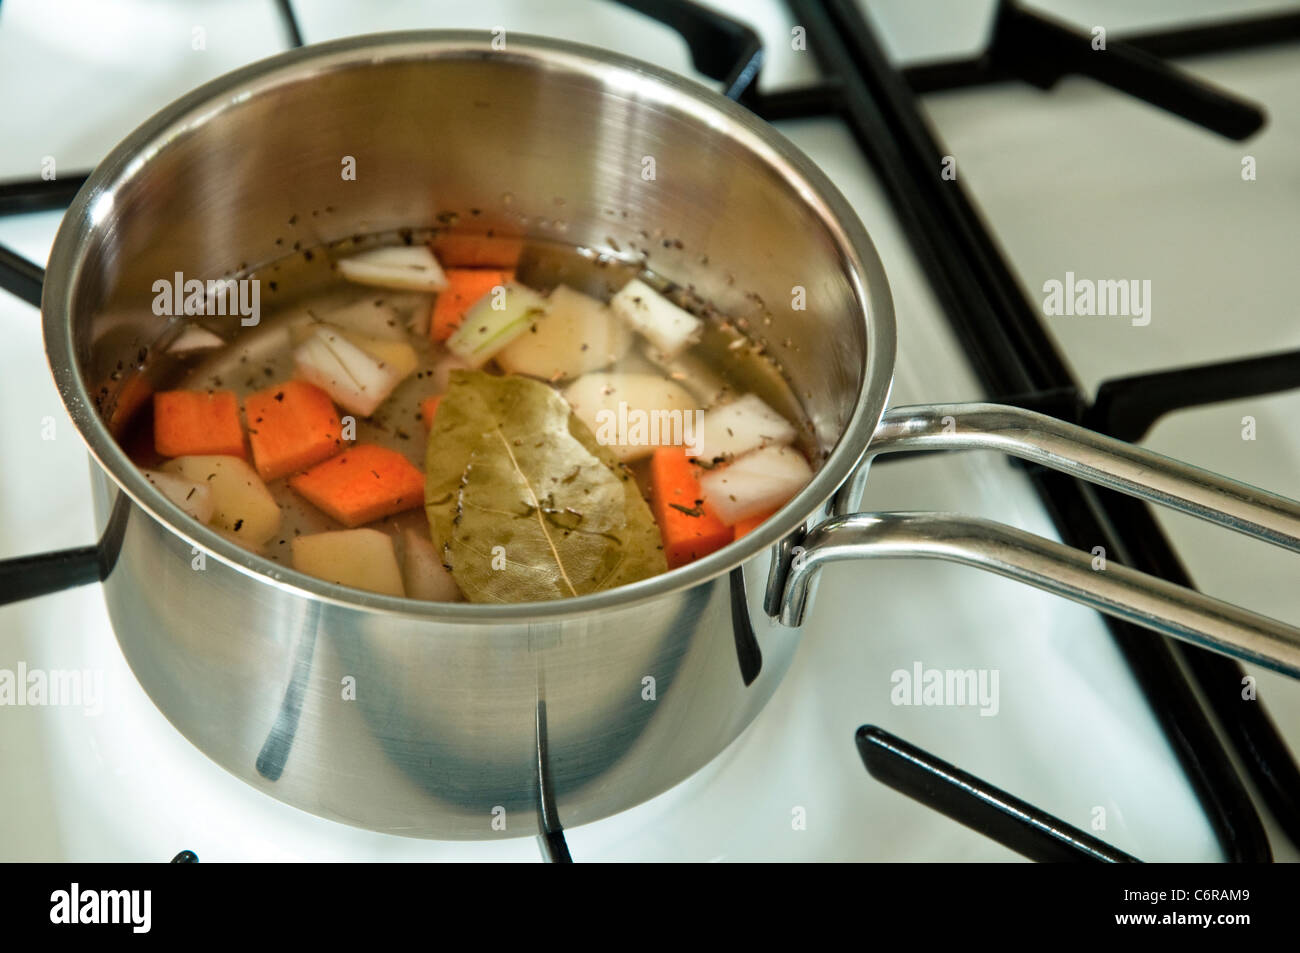 Making a stock (basis for gravy) in a pan on the hob with a variety of chopped vegetables, herbs, and seasoning. Stock Photo